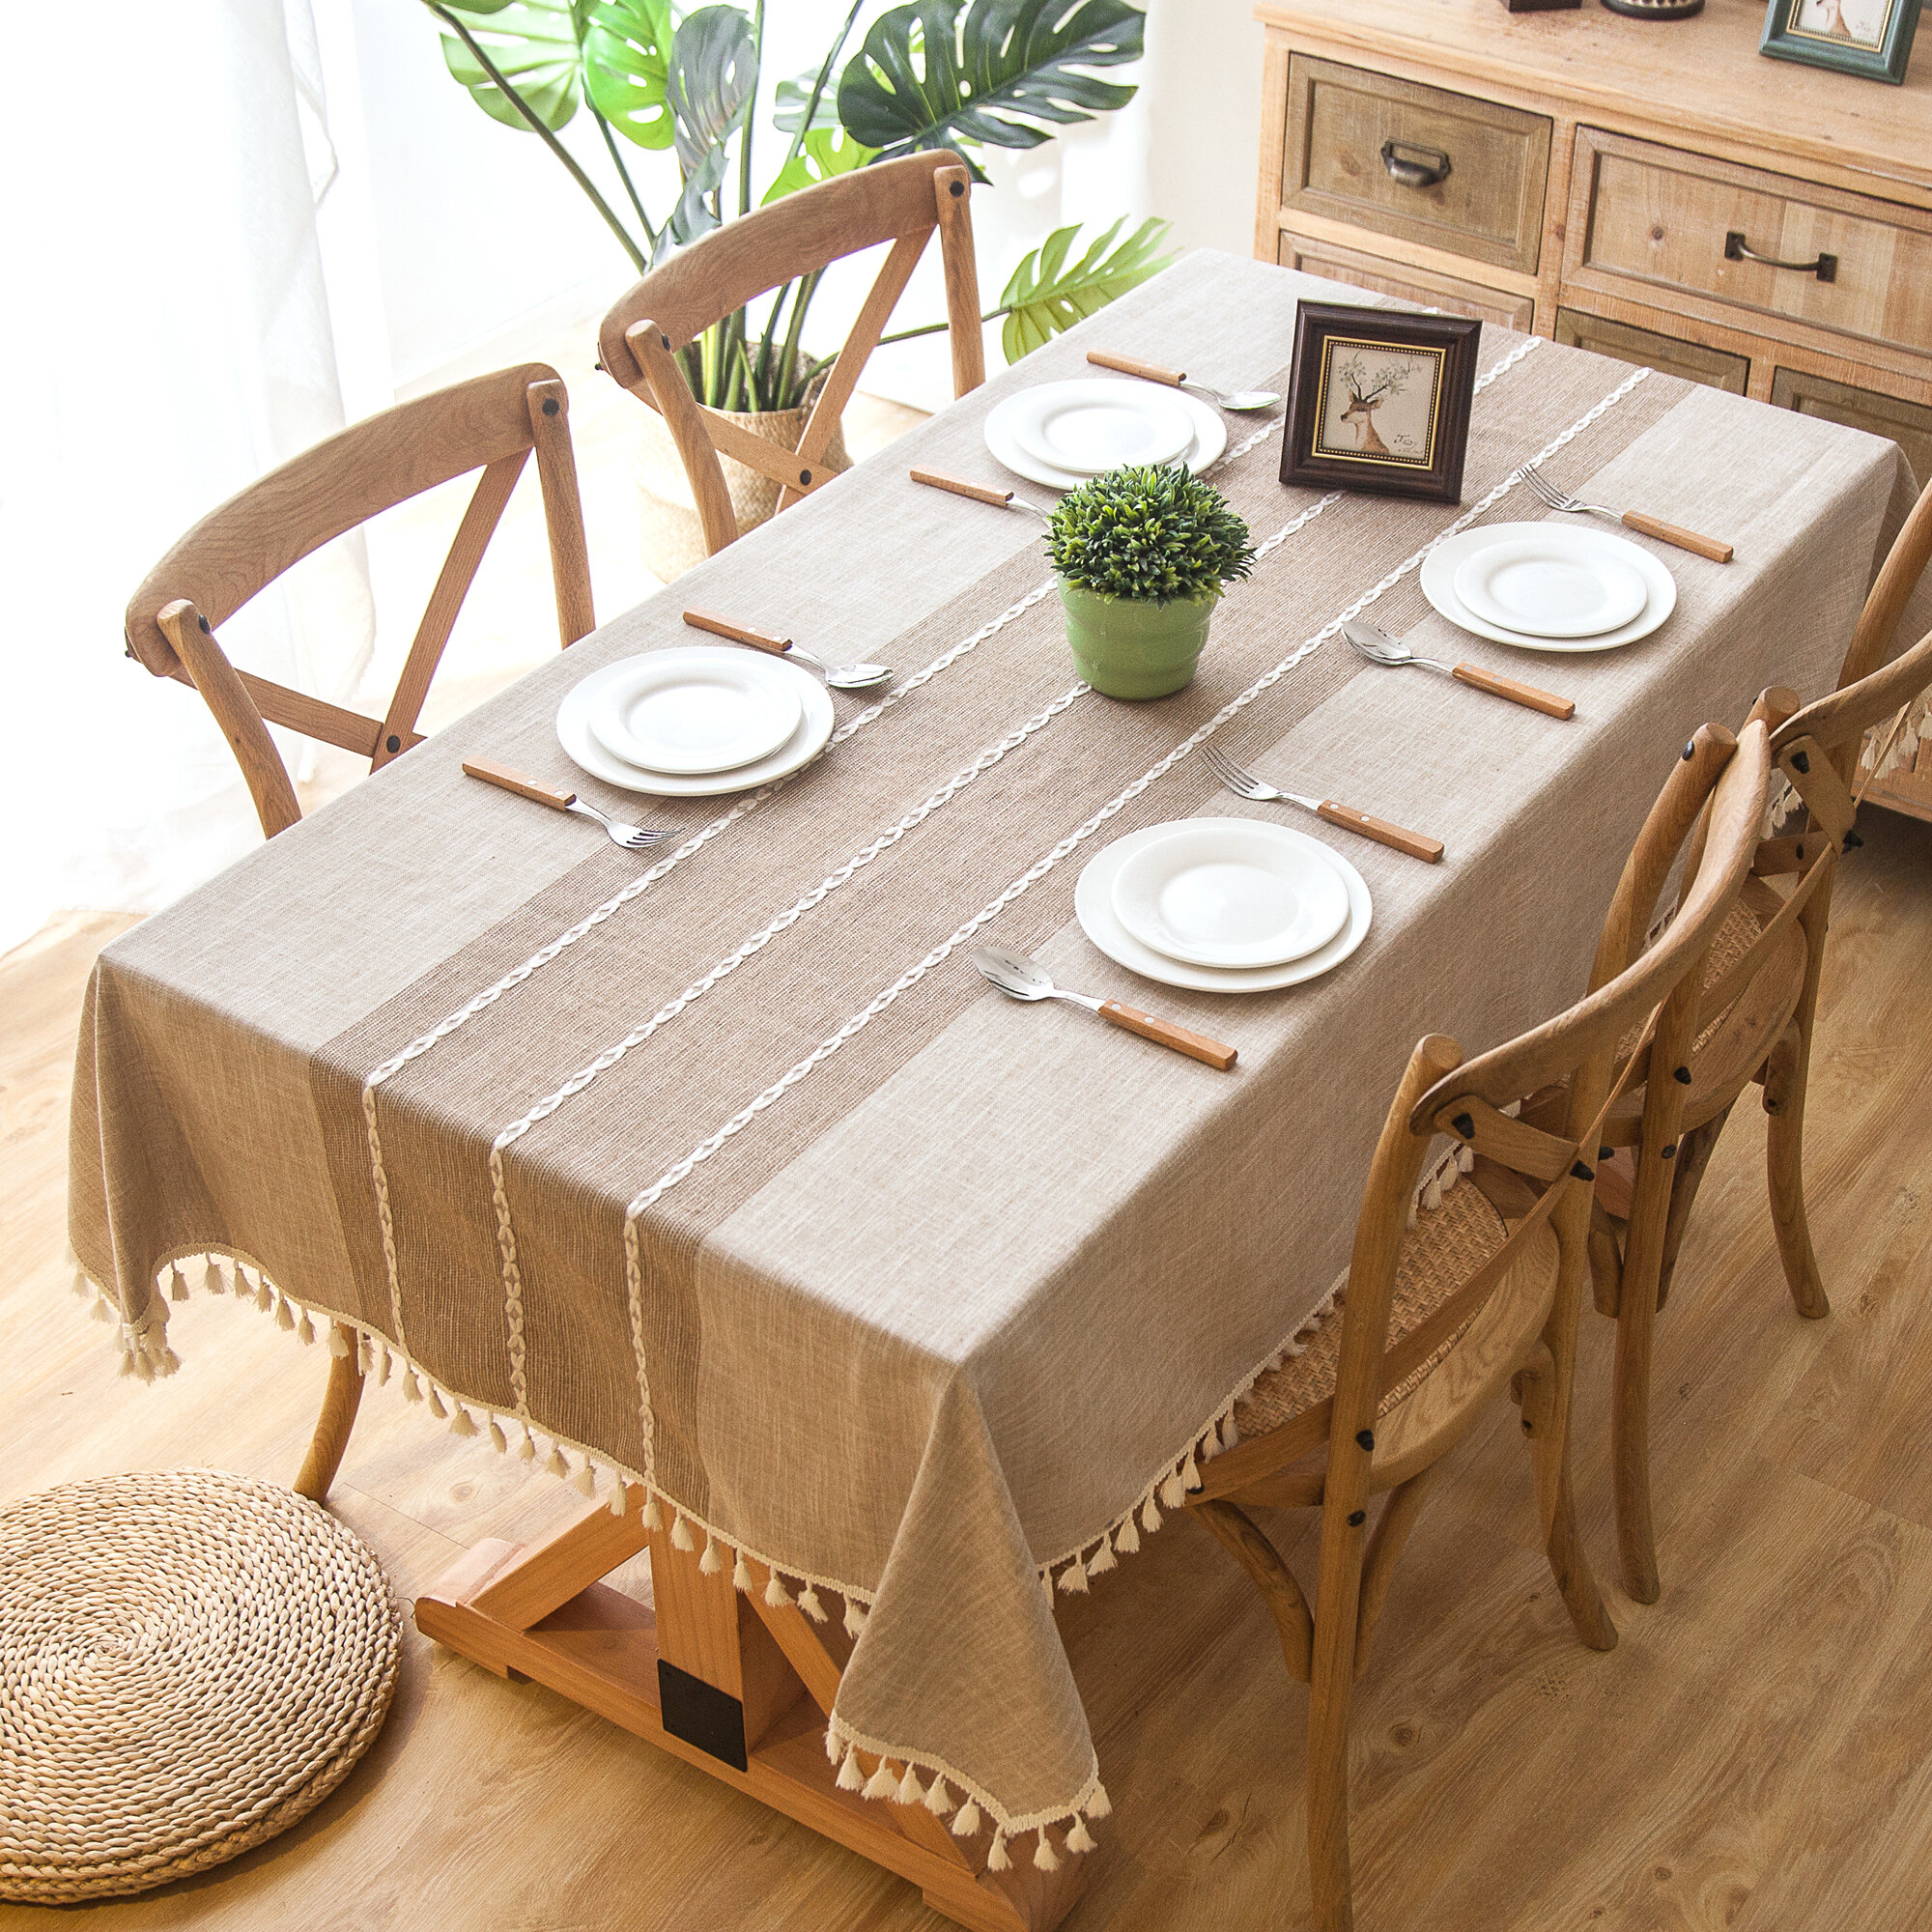 tablecloths for dining room tables